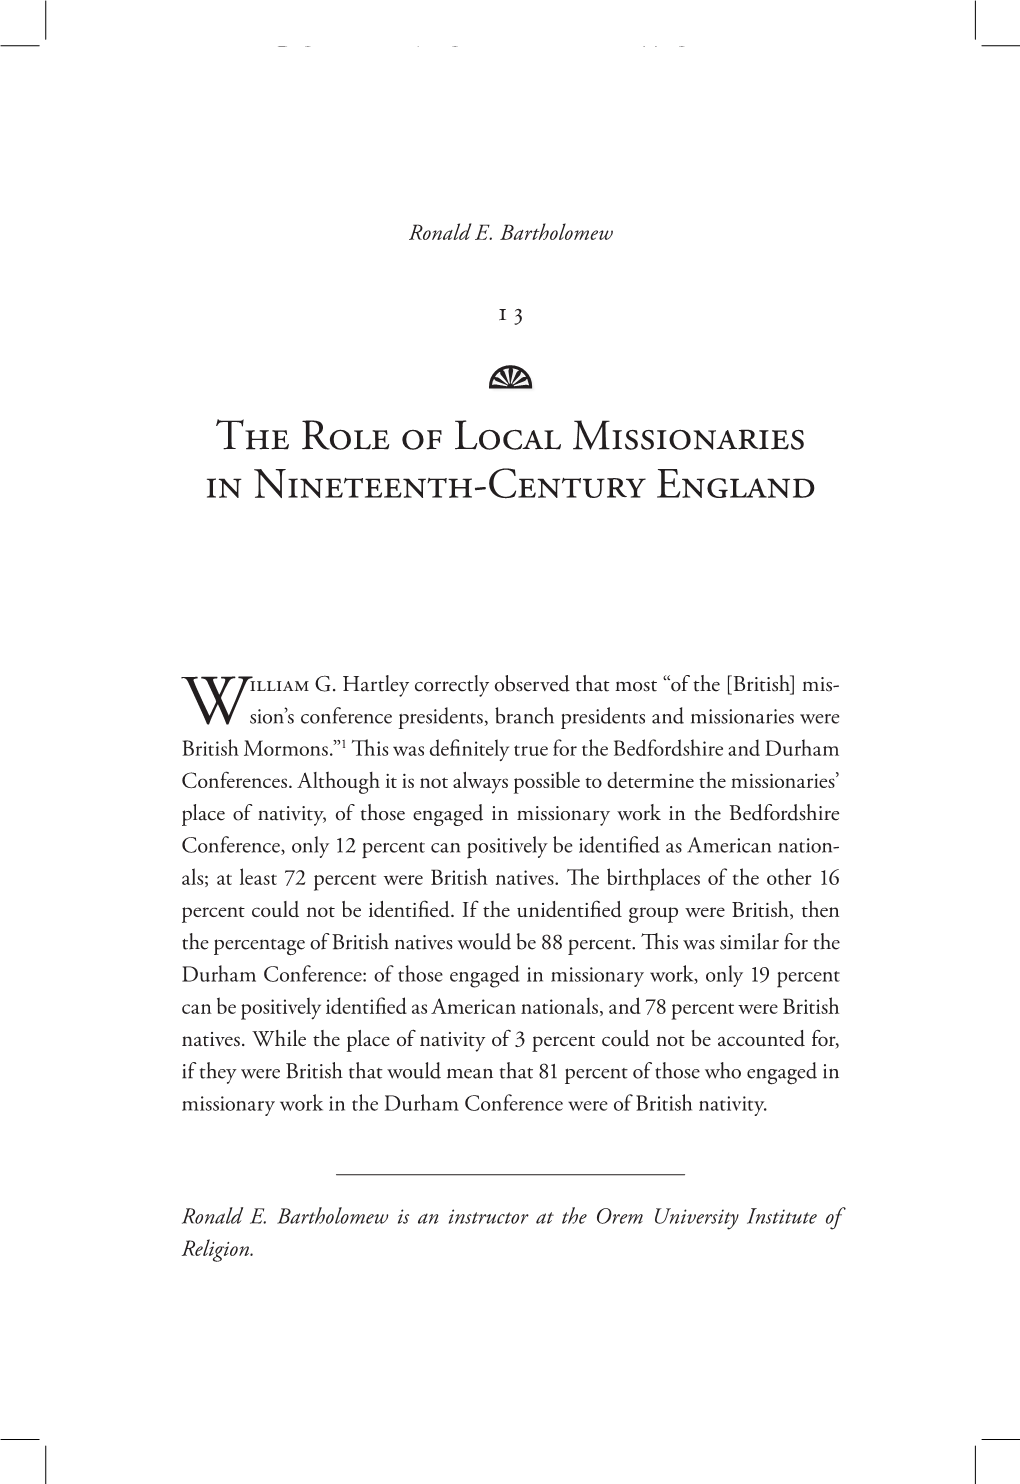 The Role of Local Missionaries in Nineteenth-Century England Go